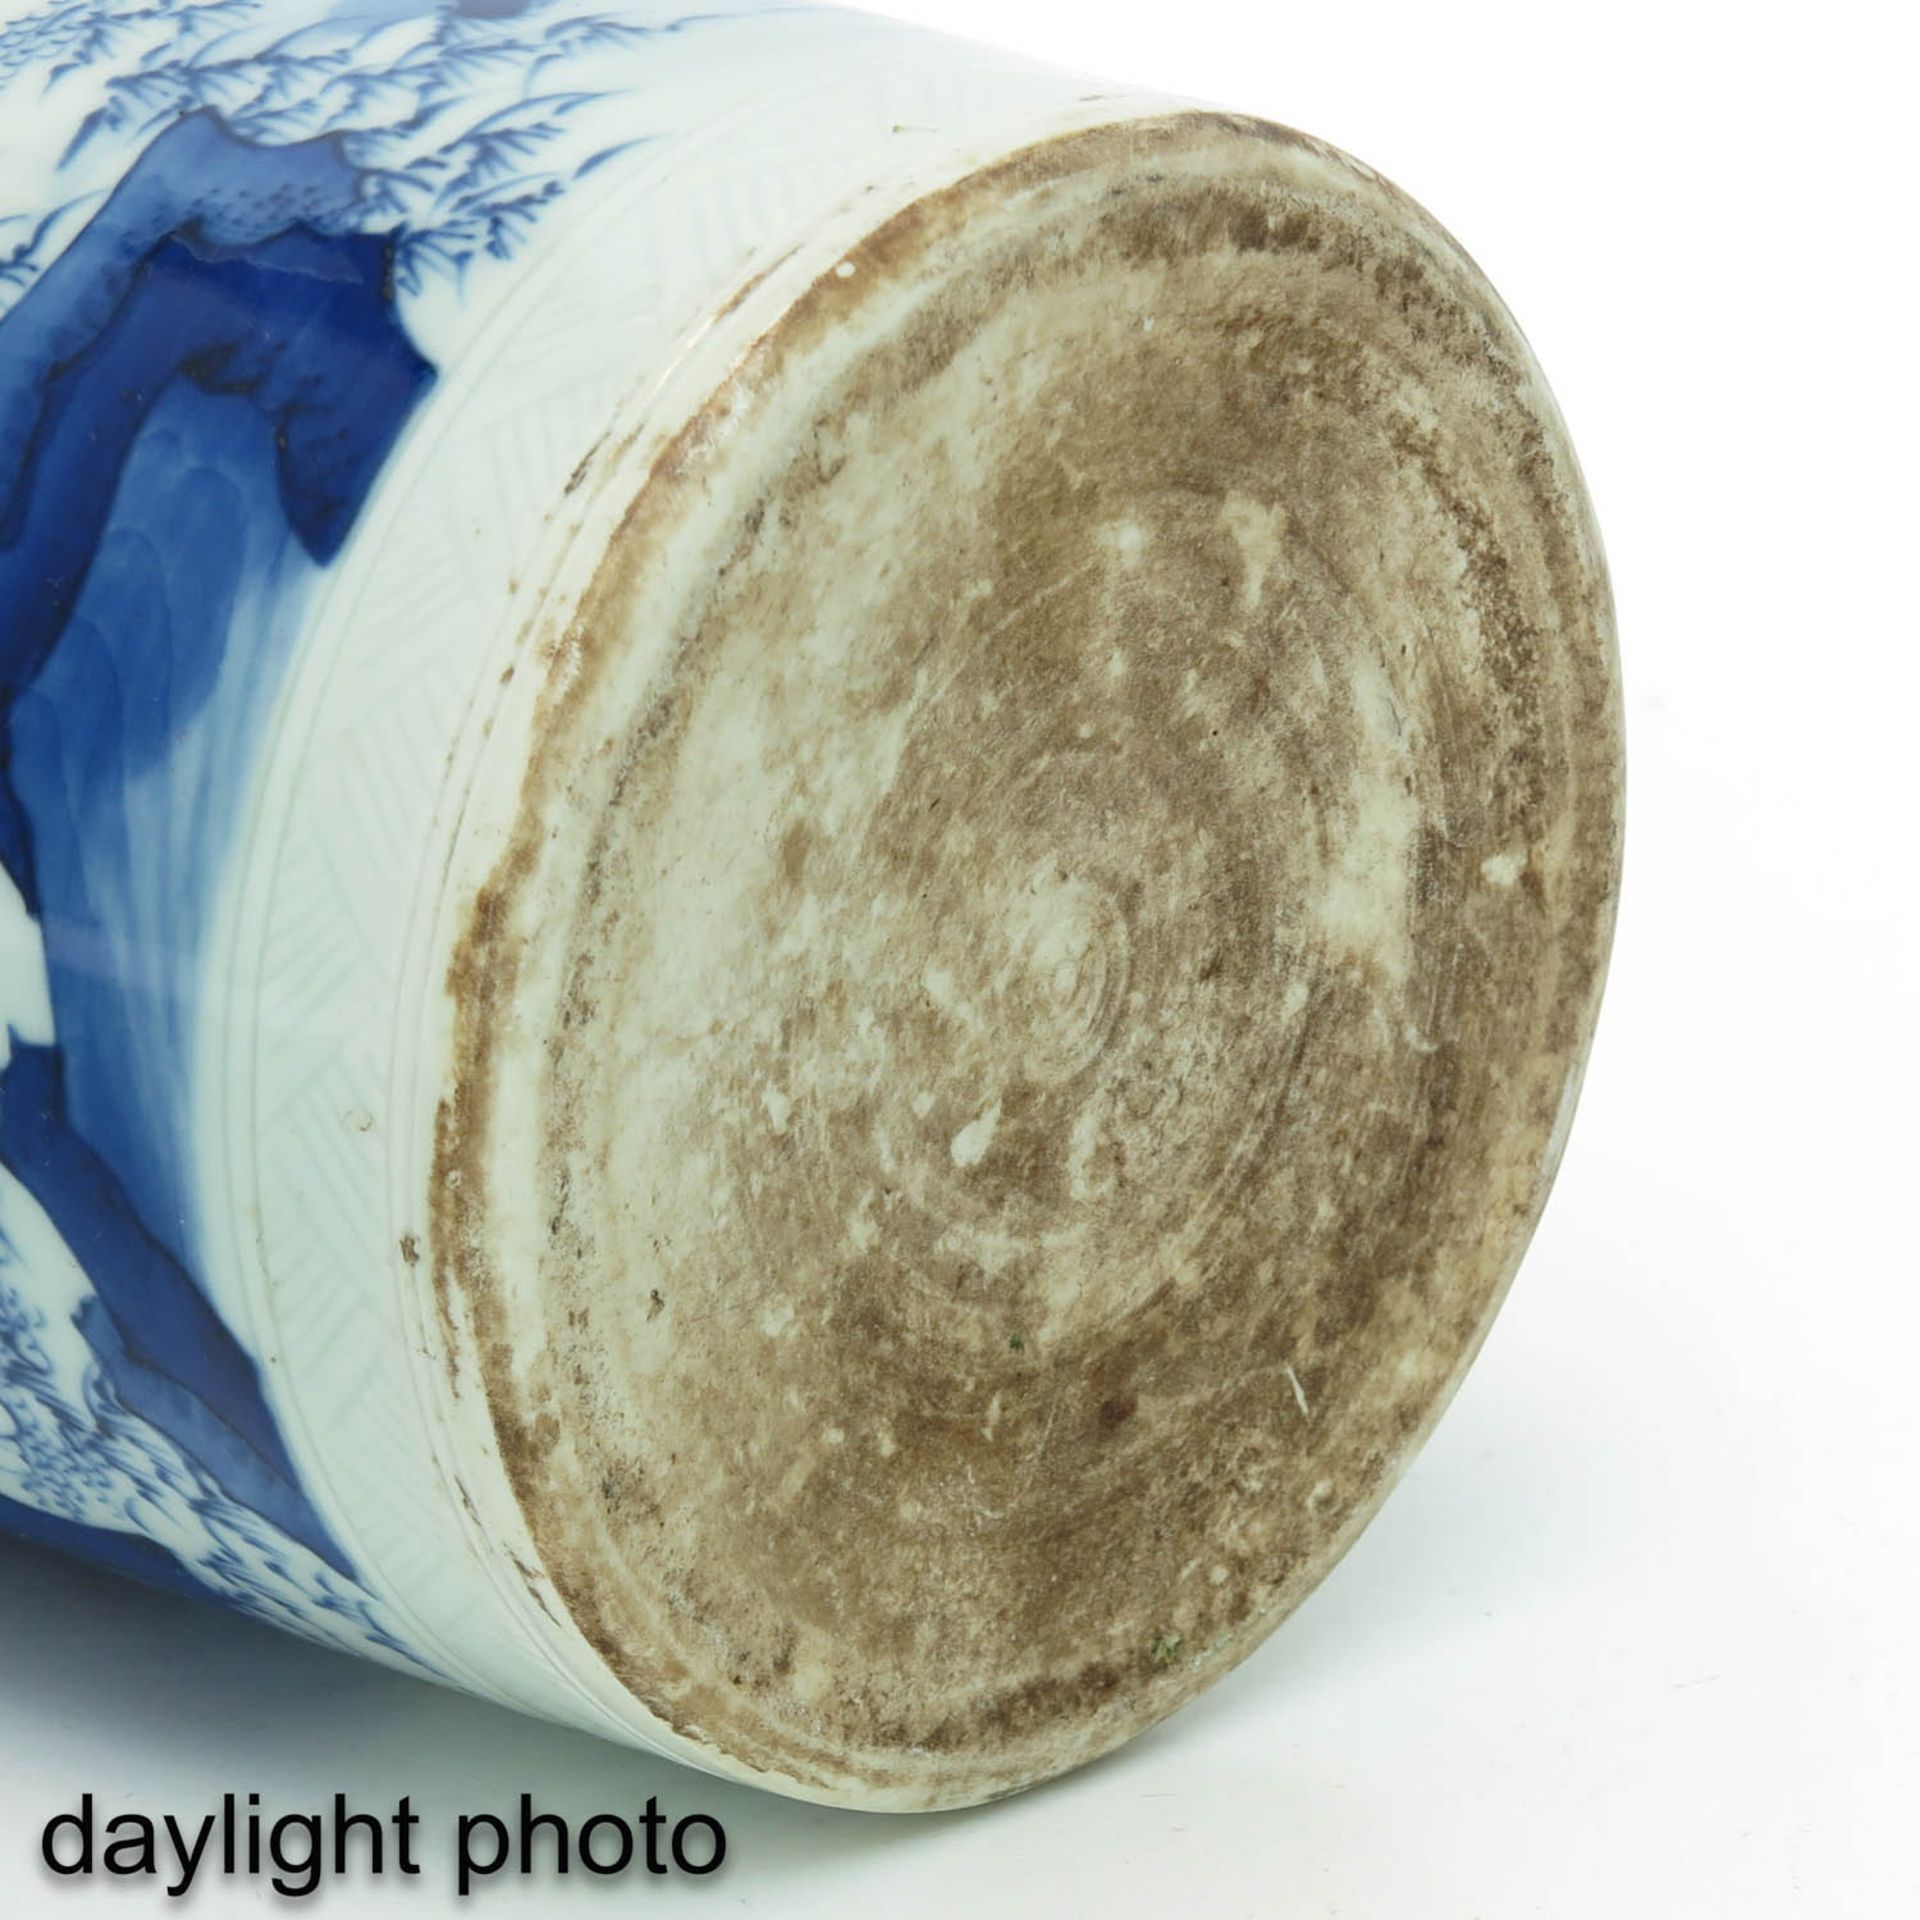 A Blue and White Vase - Image 8 of 9